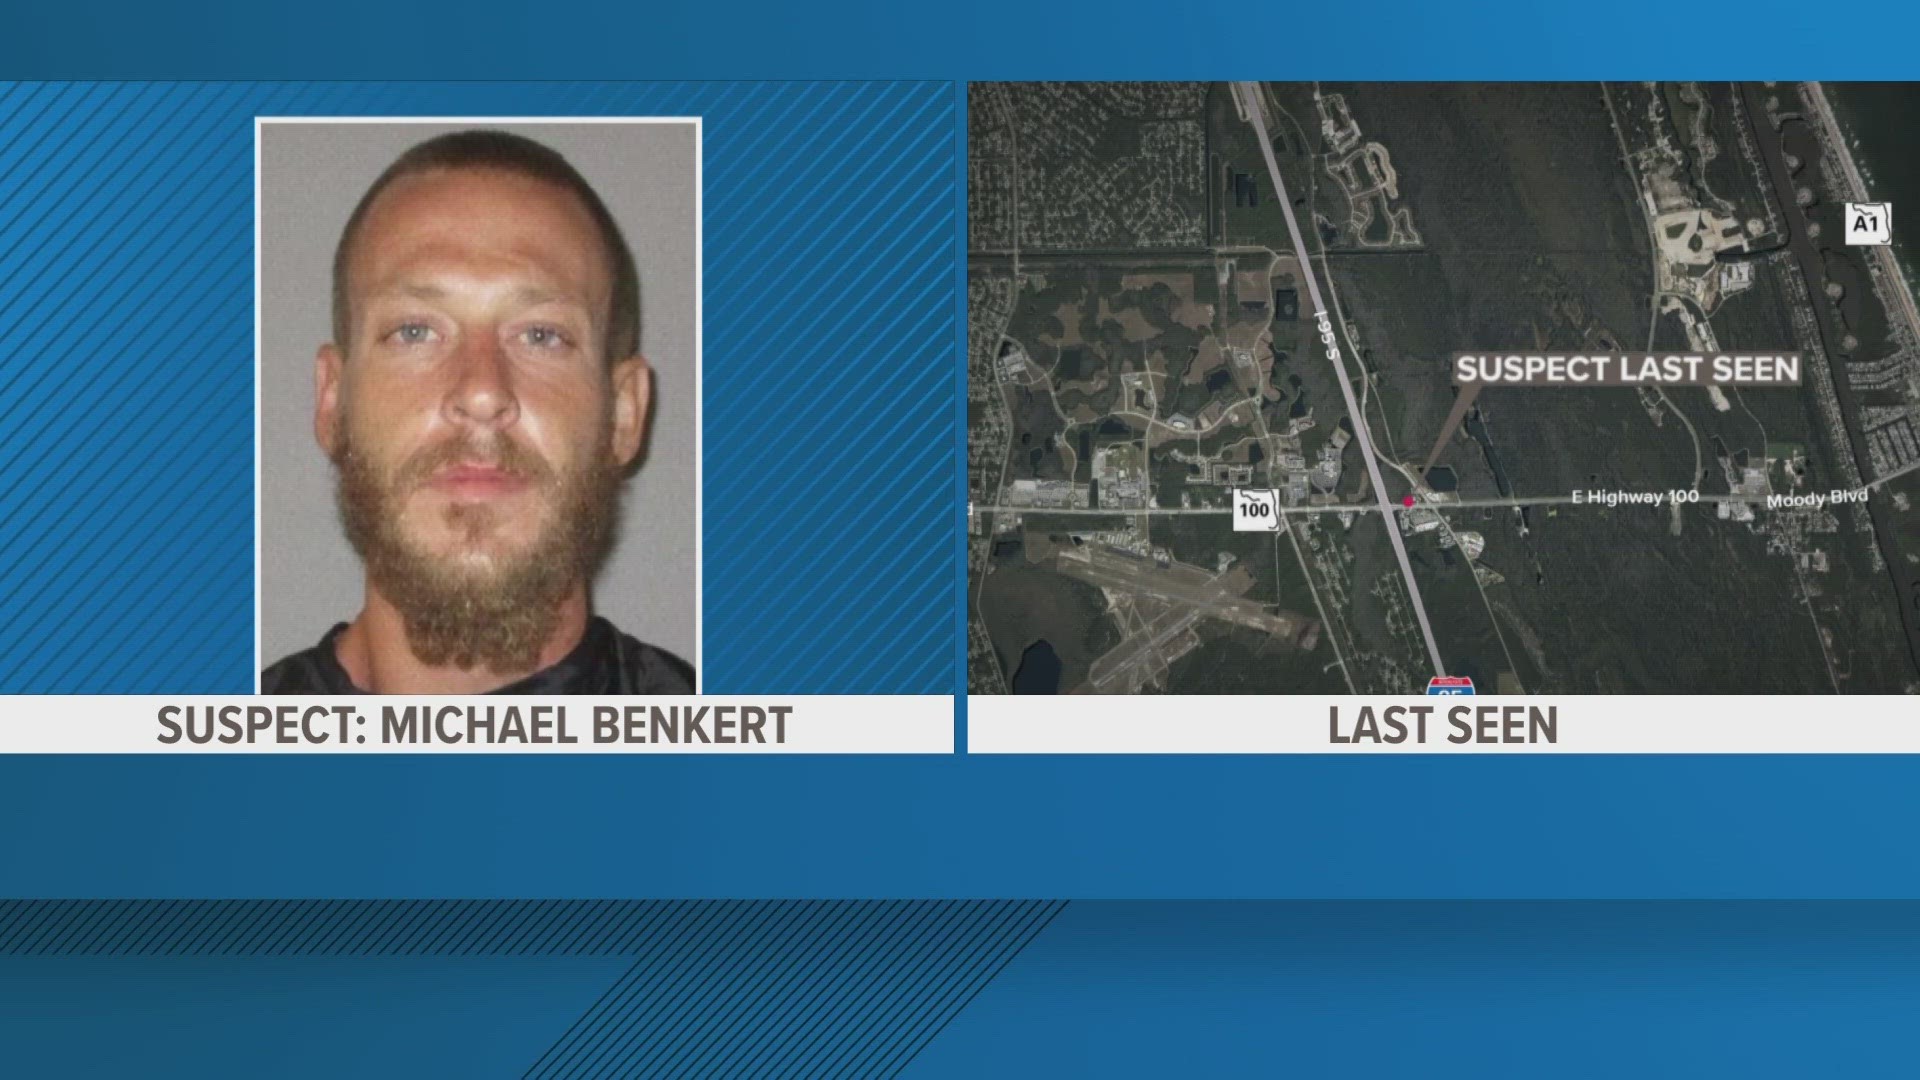 Deputies are searching for 31-year-old Michael Steven Benkert near a Mobil gas station on State Road 100 in Flagler Beach.